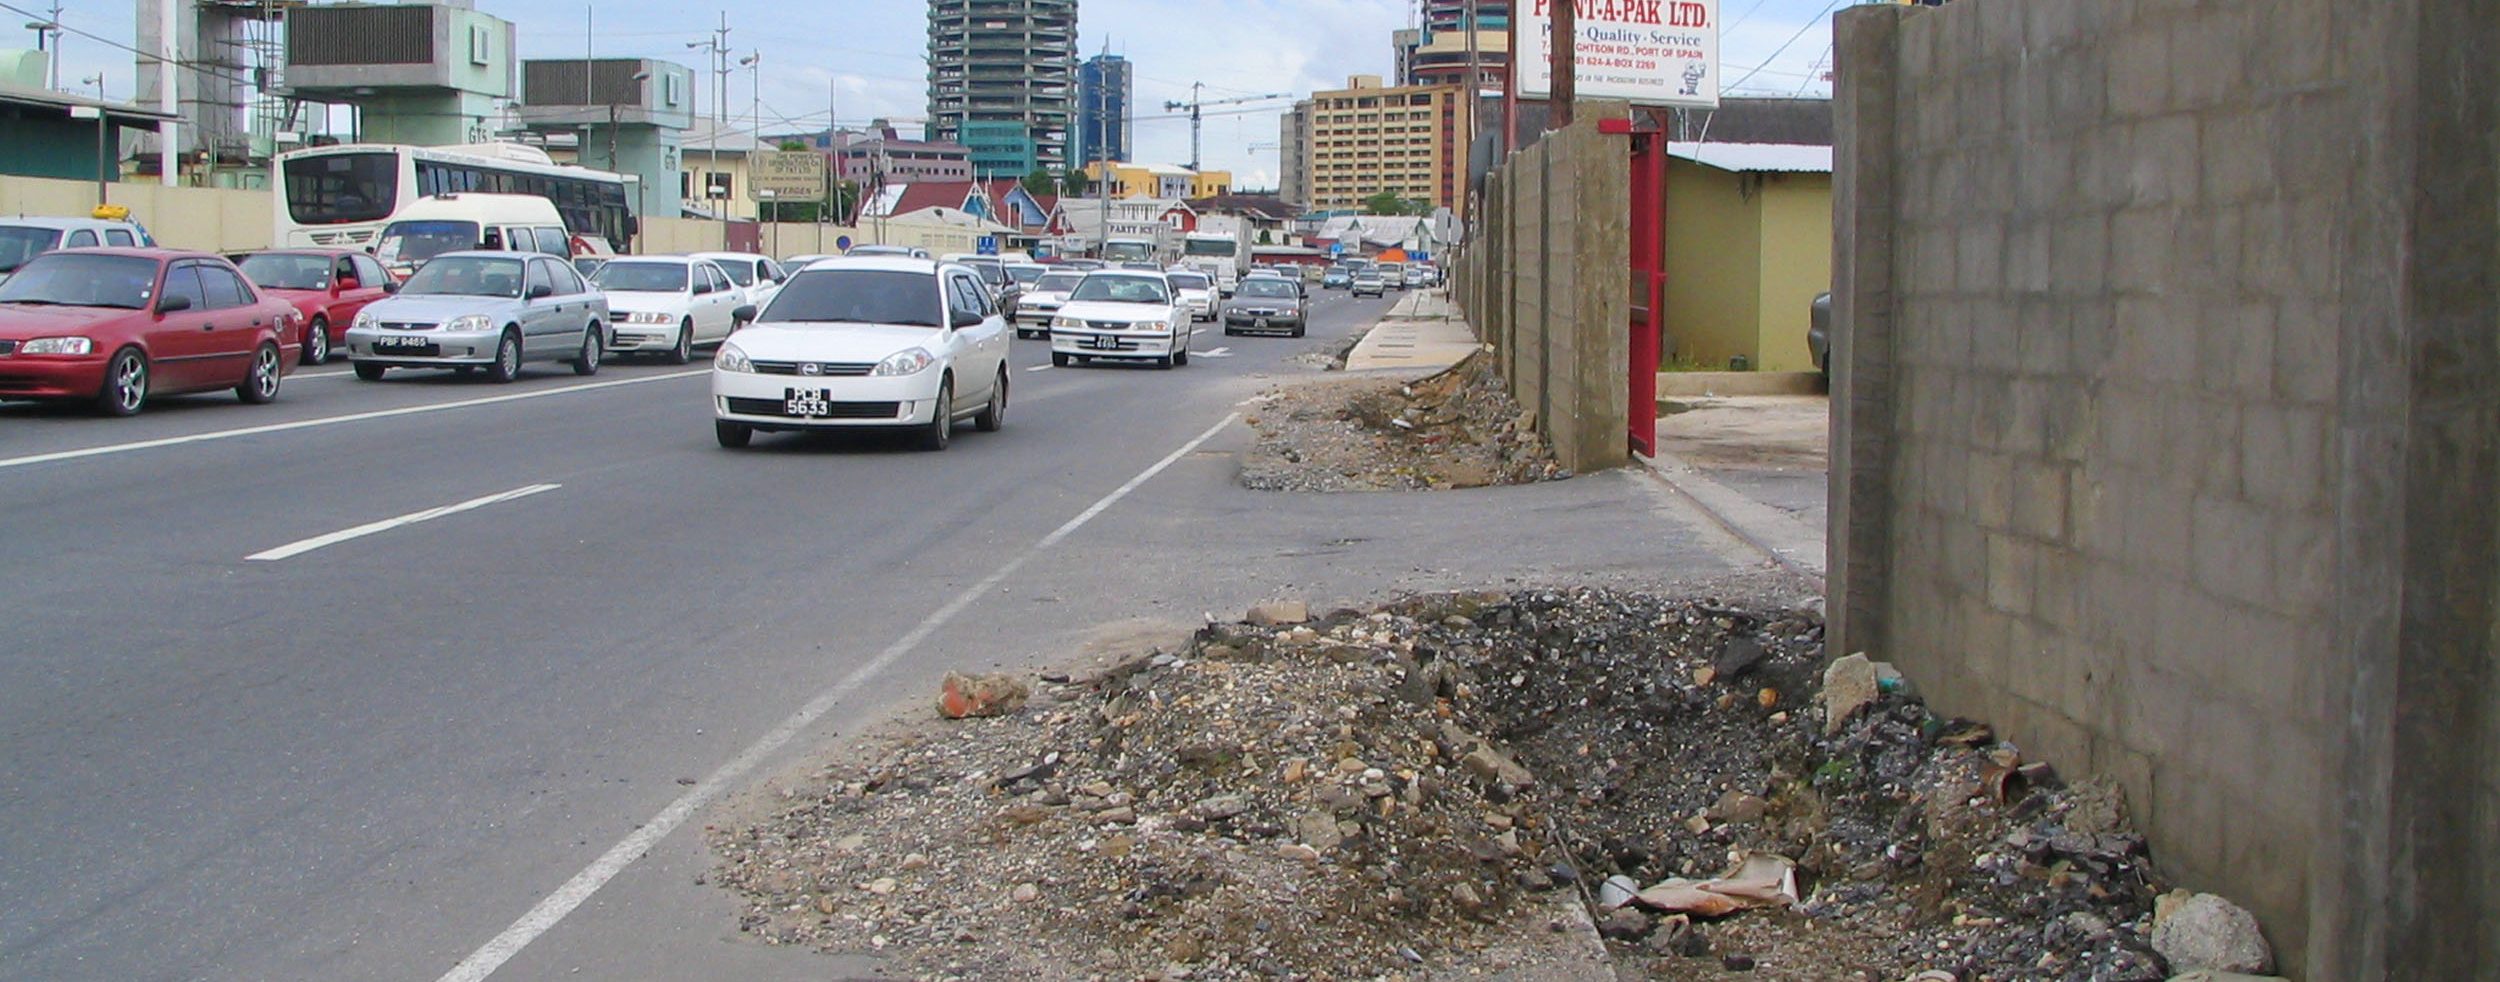 Wrightson Road in Port of Spain